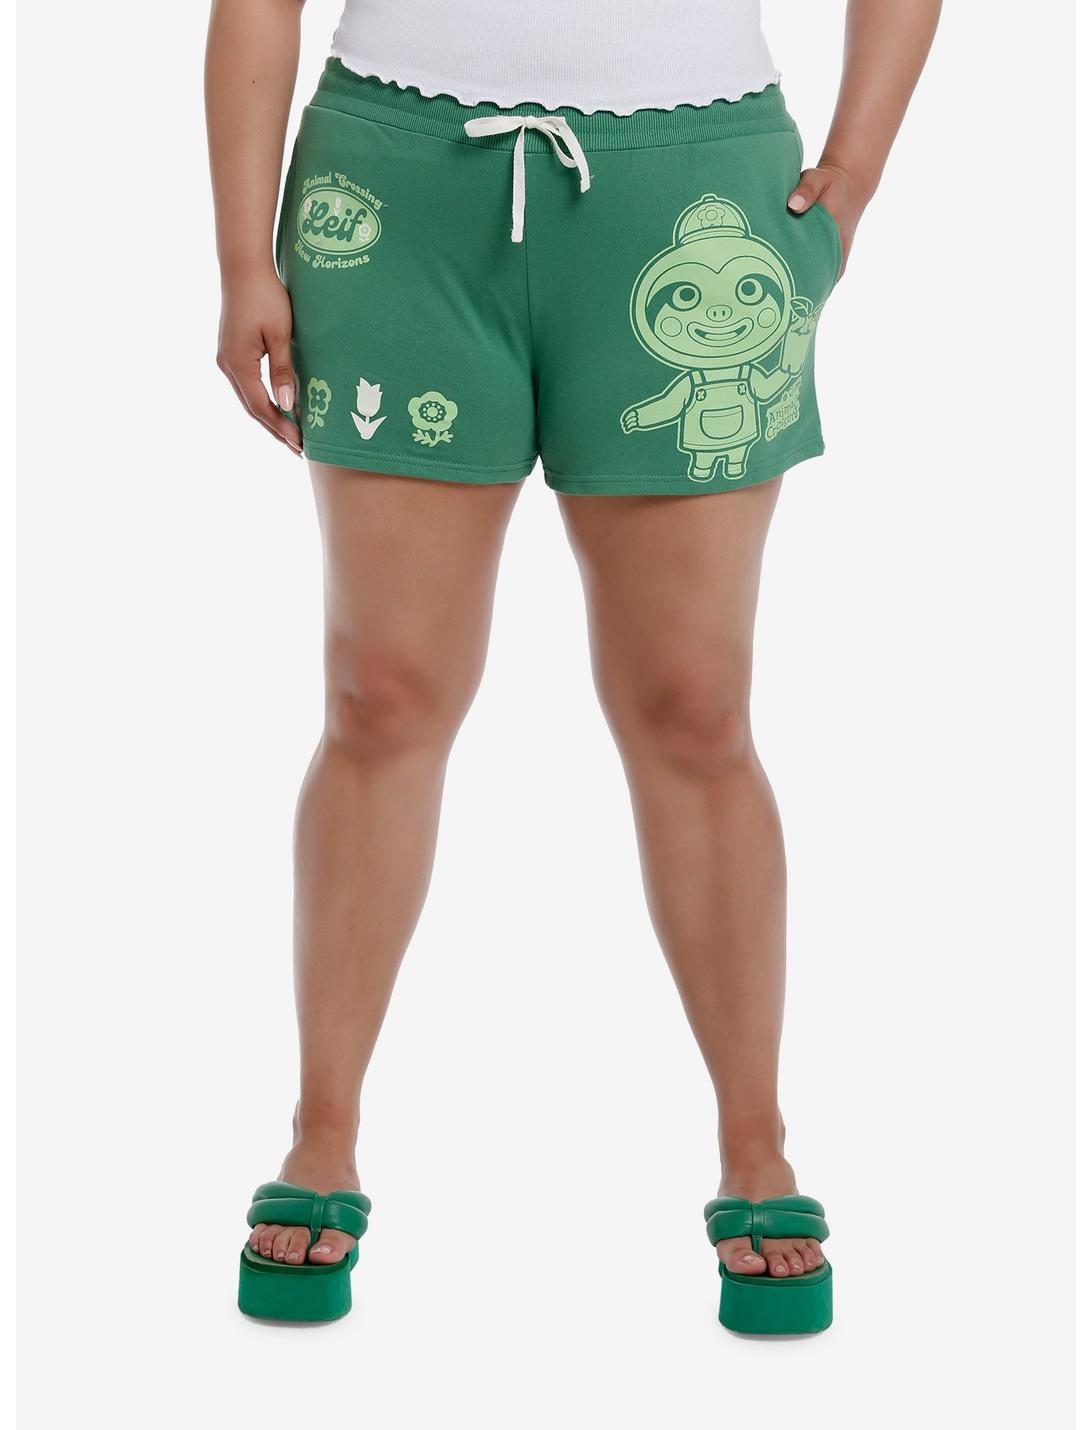 Animal Crossing: New Horizons Leif Lounge Shorts Plus Size, GREEN, hi-res